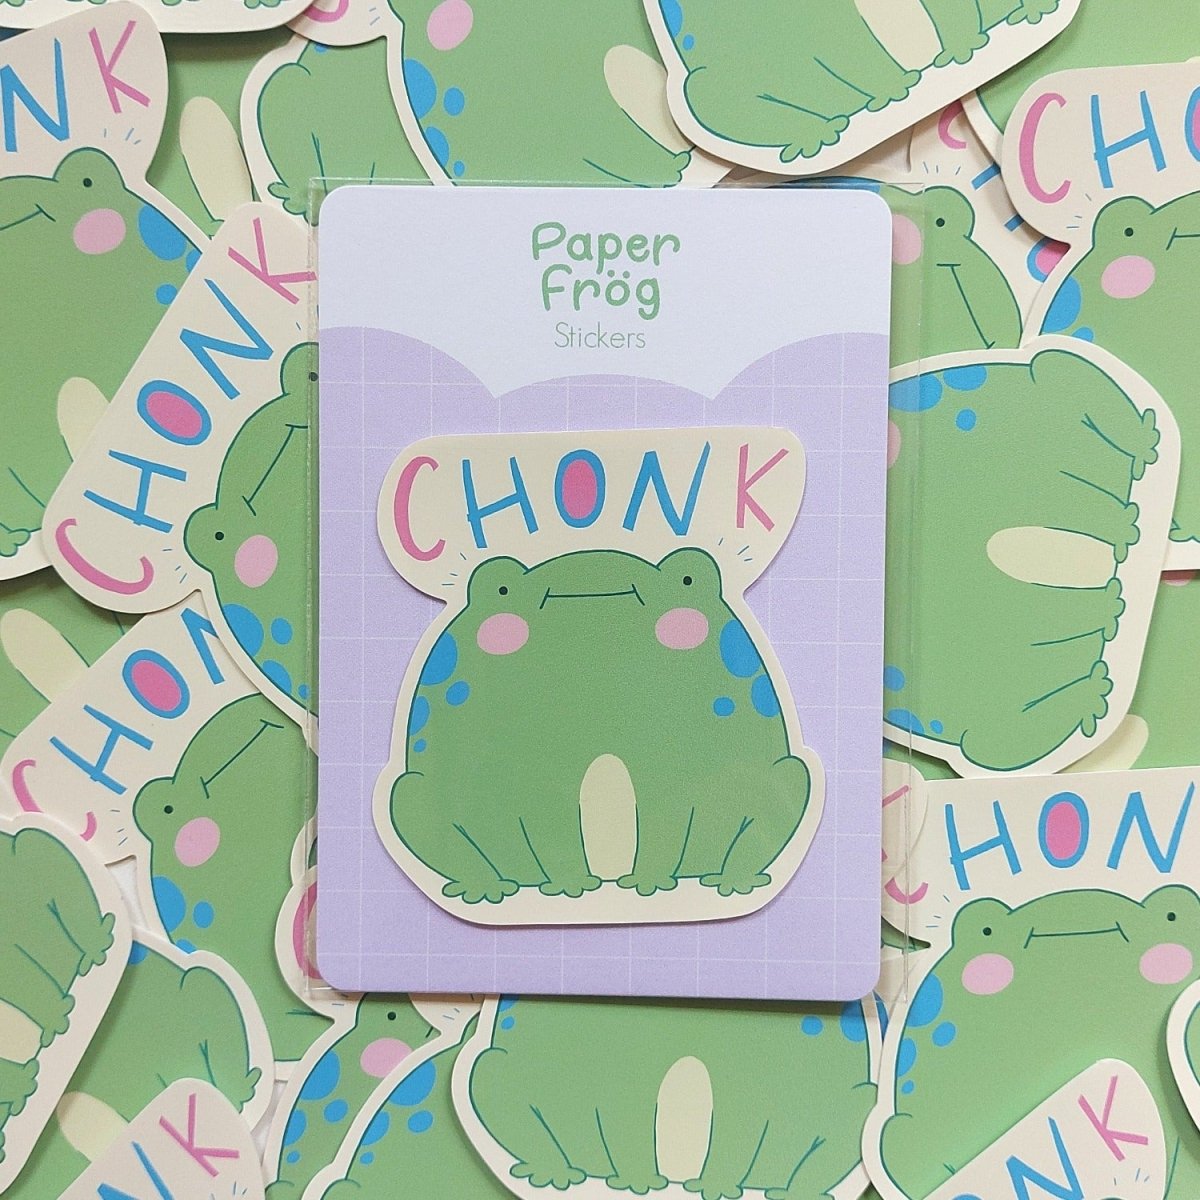 "Chonk Frog" glossy sticker - Paperfrog - Stickers